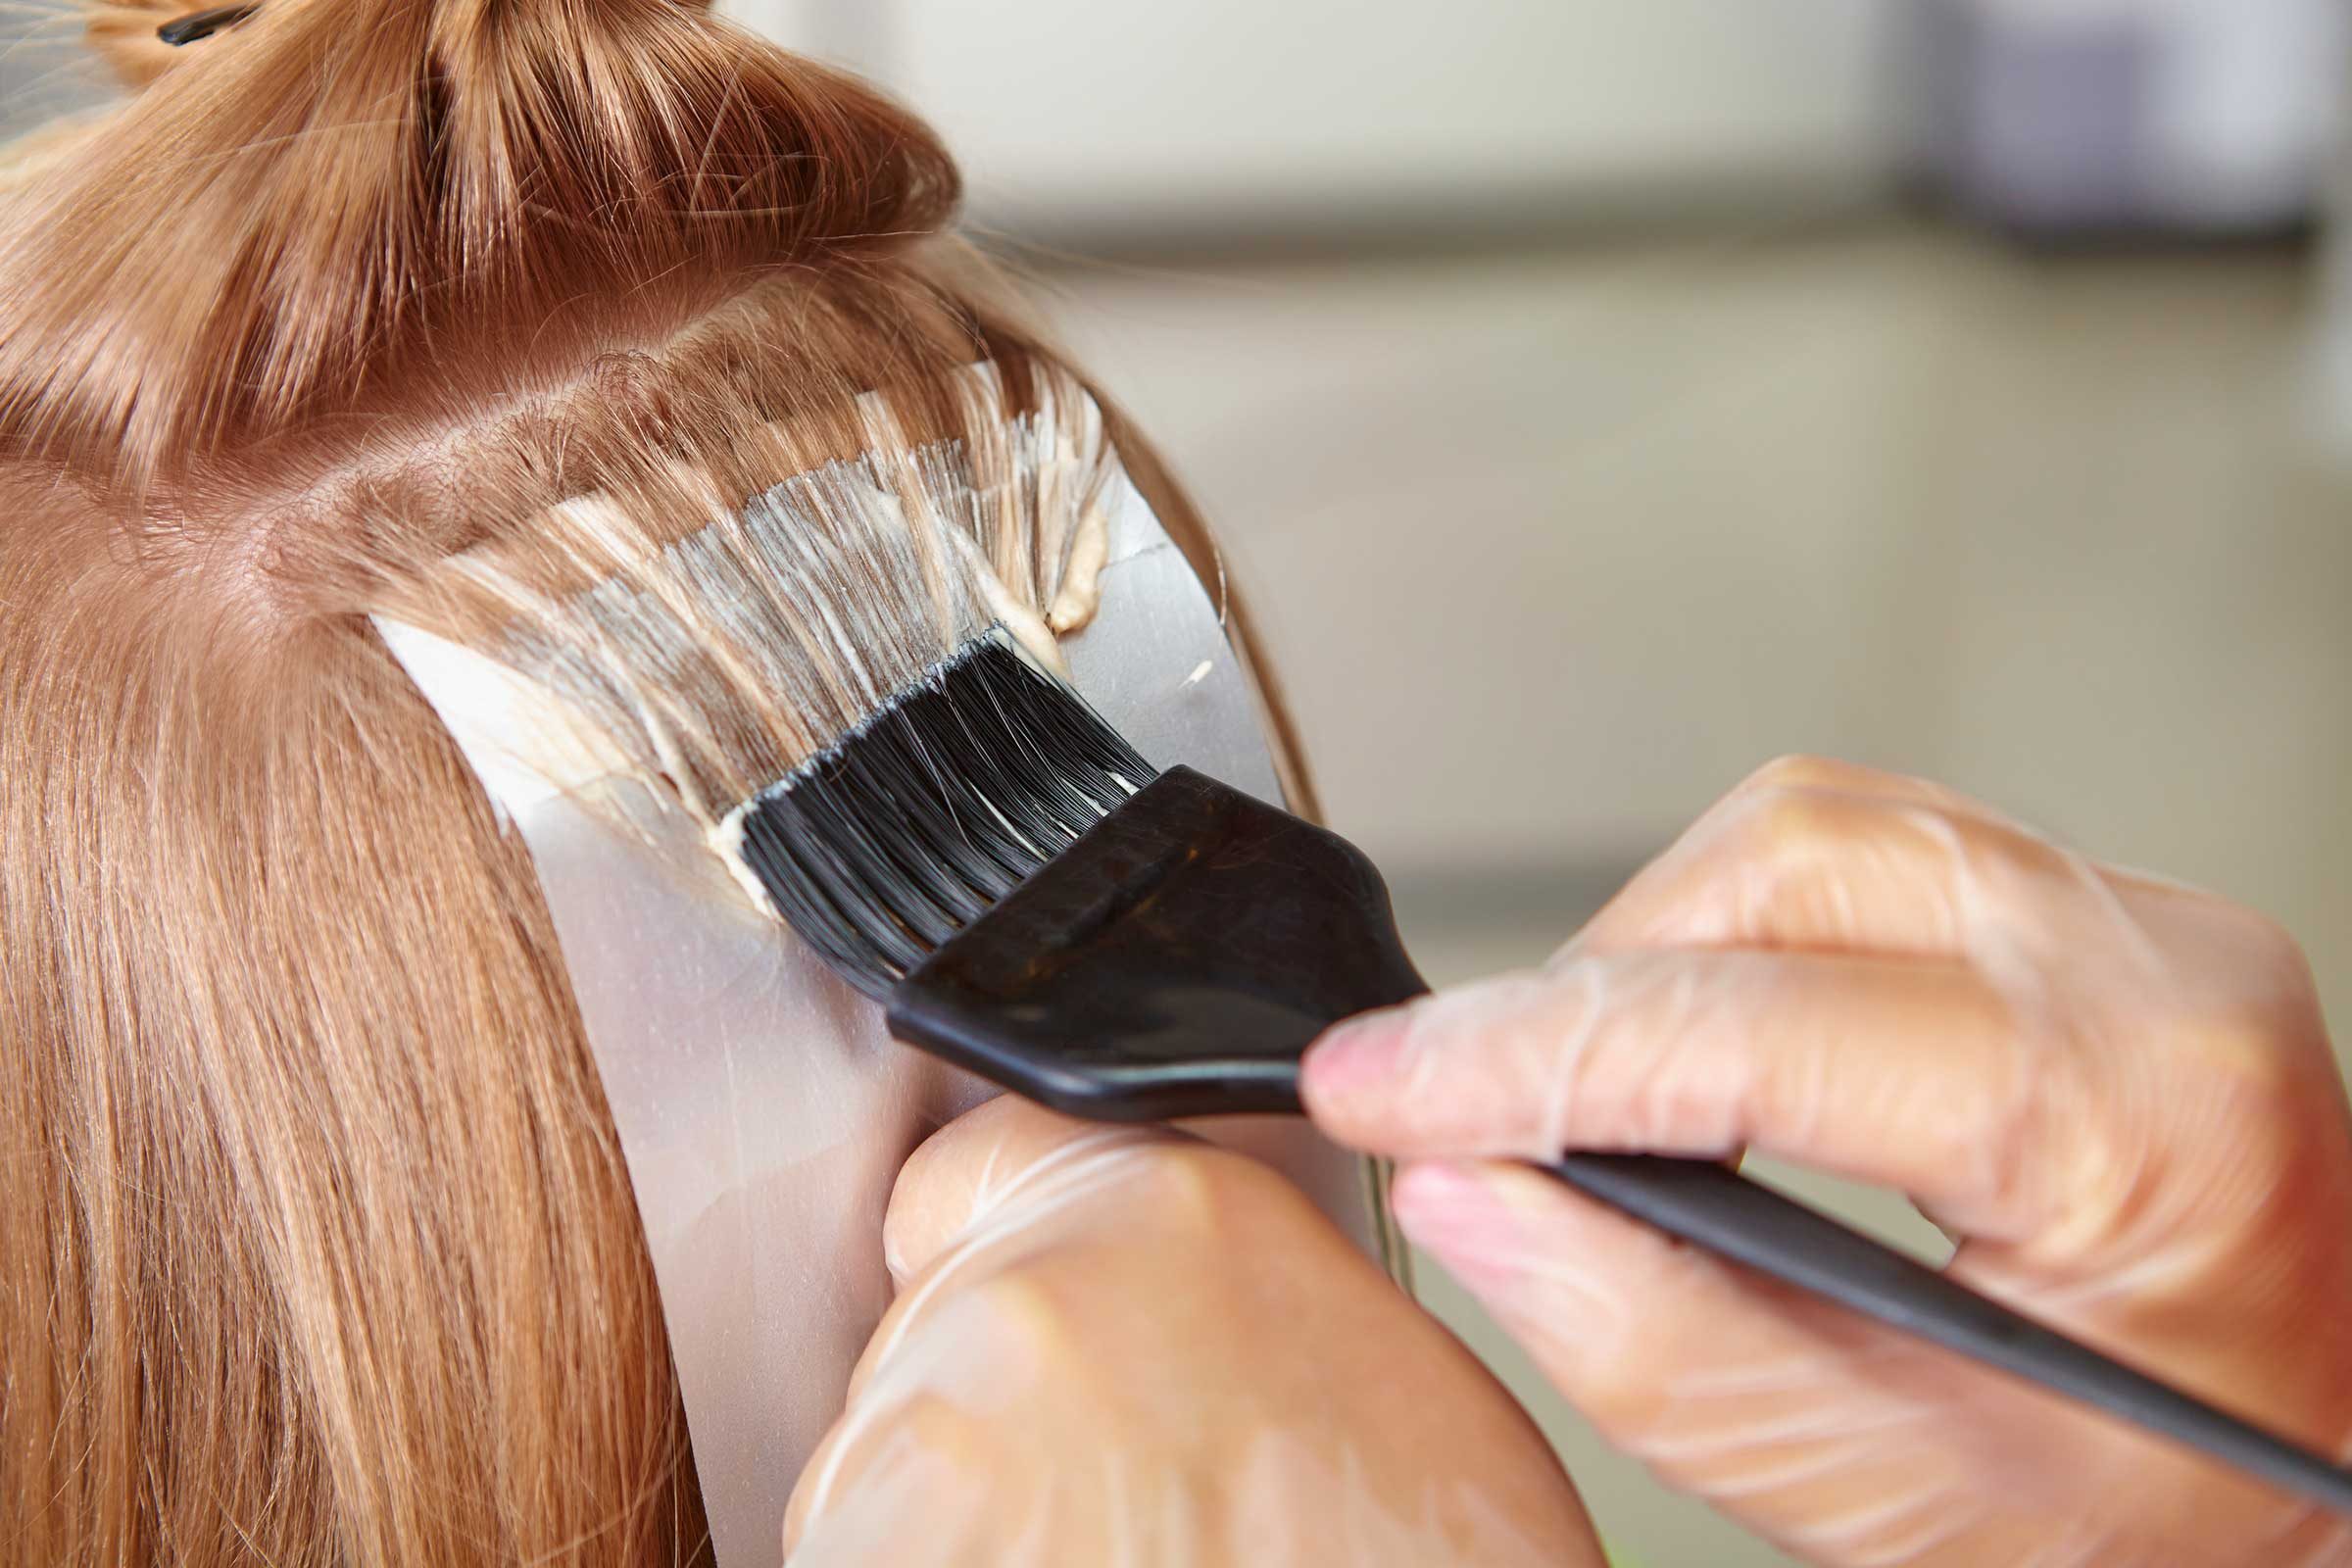 How long after using RID should you wait before coloring your hair?